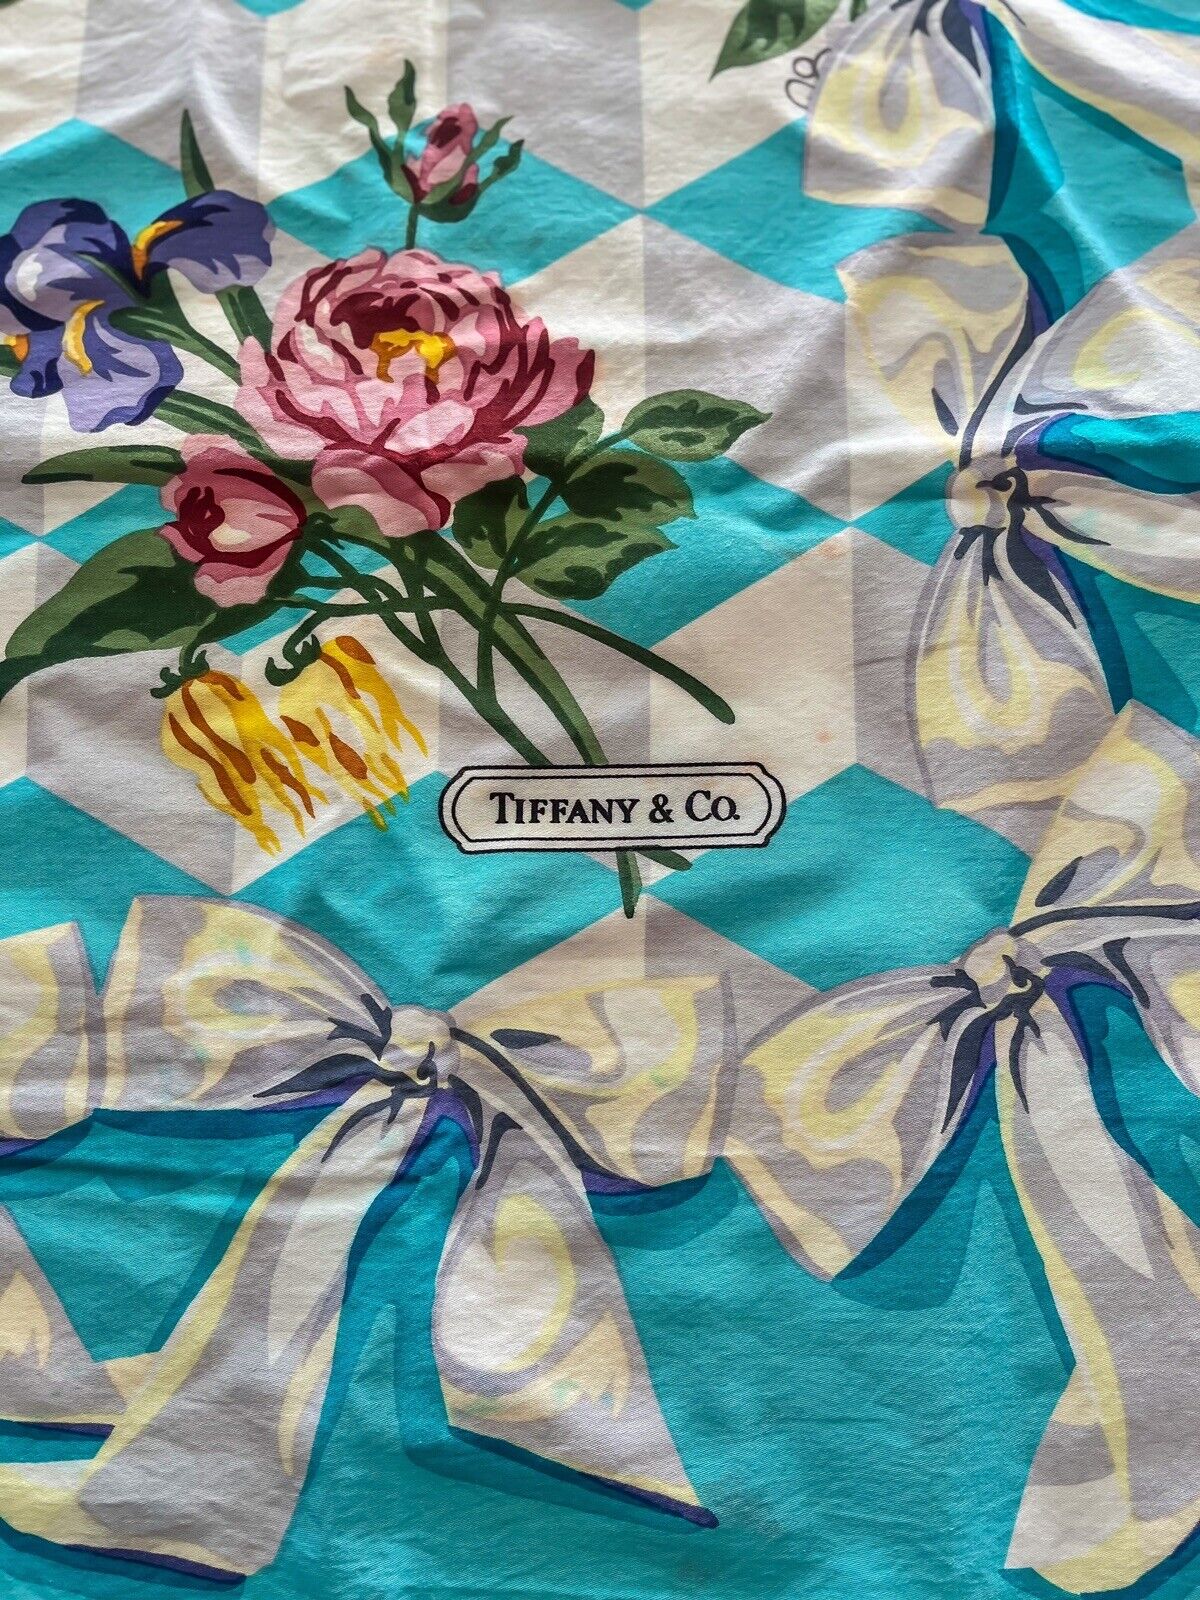 Vintage Tiffany & Co Tablecloth Rose Bow Floral Cotton 51 X 51” Square